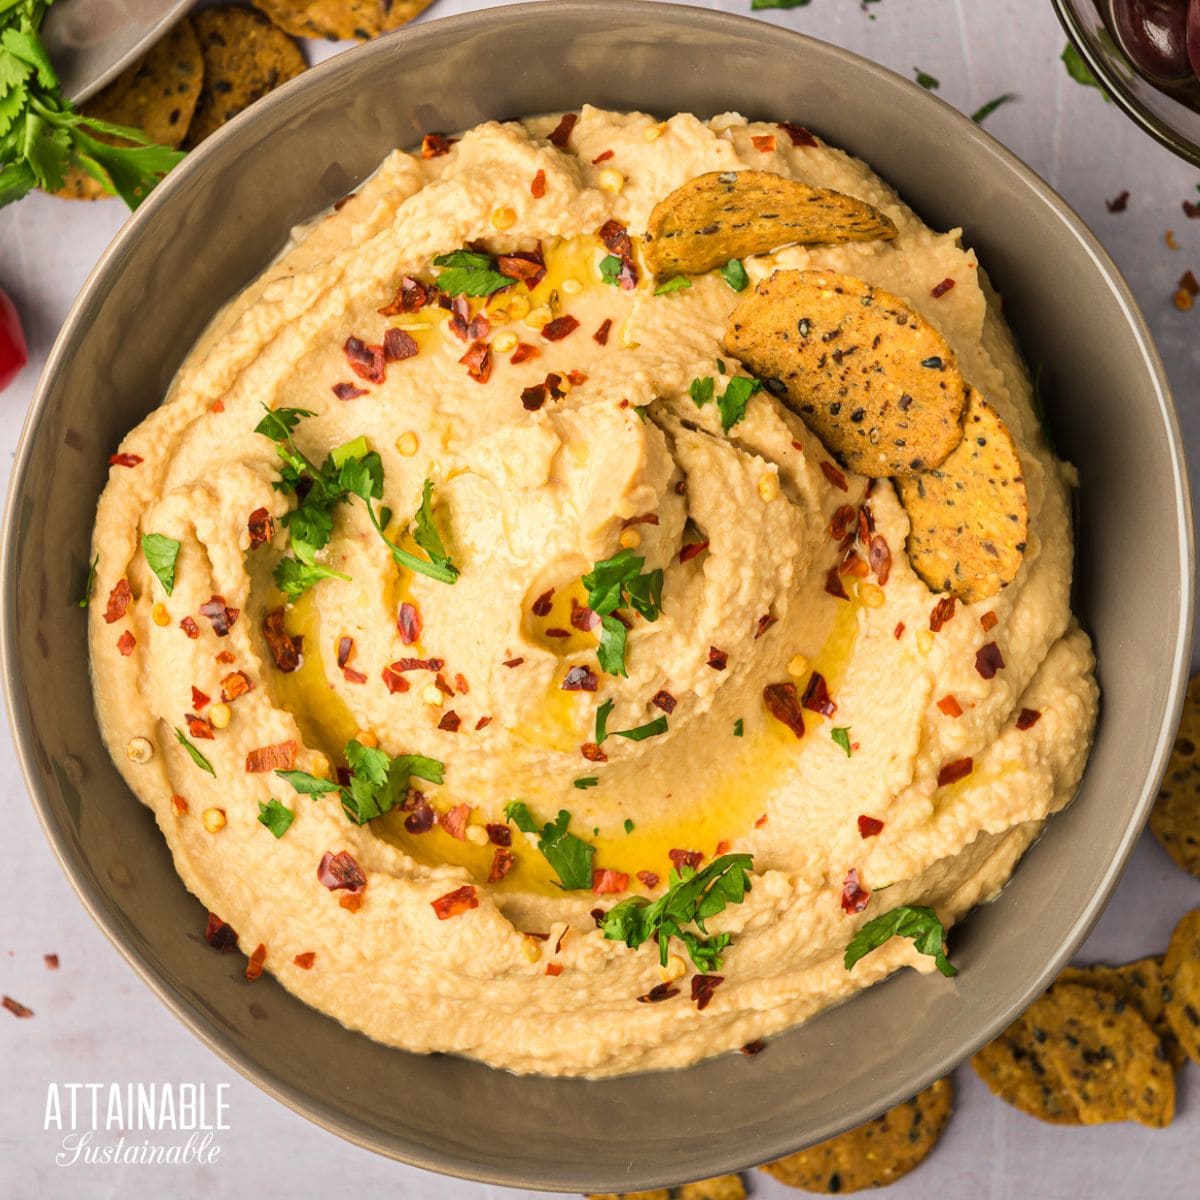 chipotle hummus in a brown bowl from above.